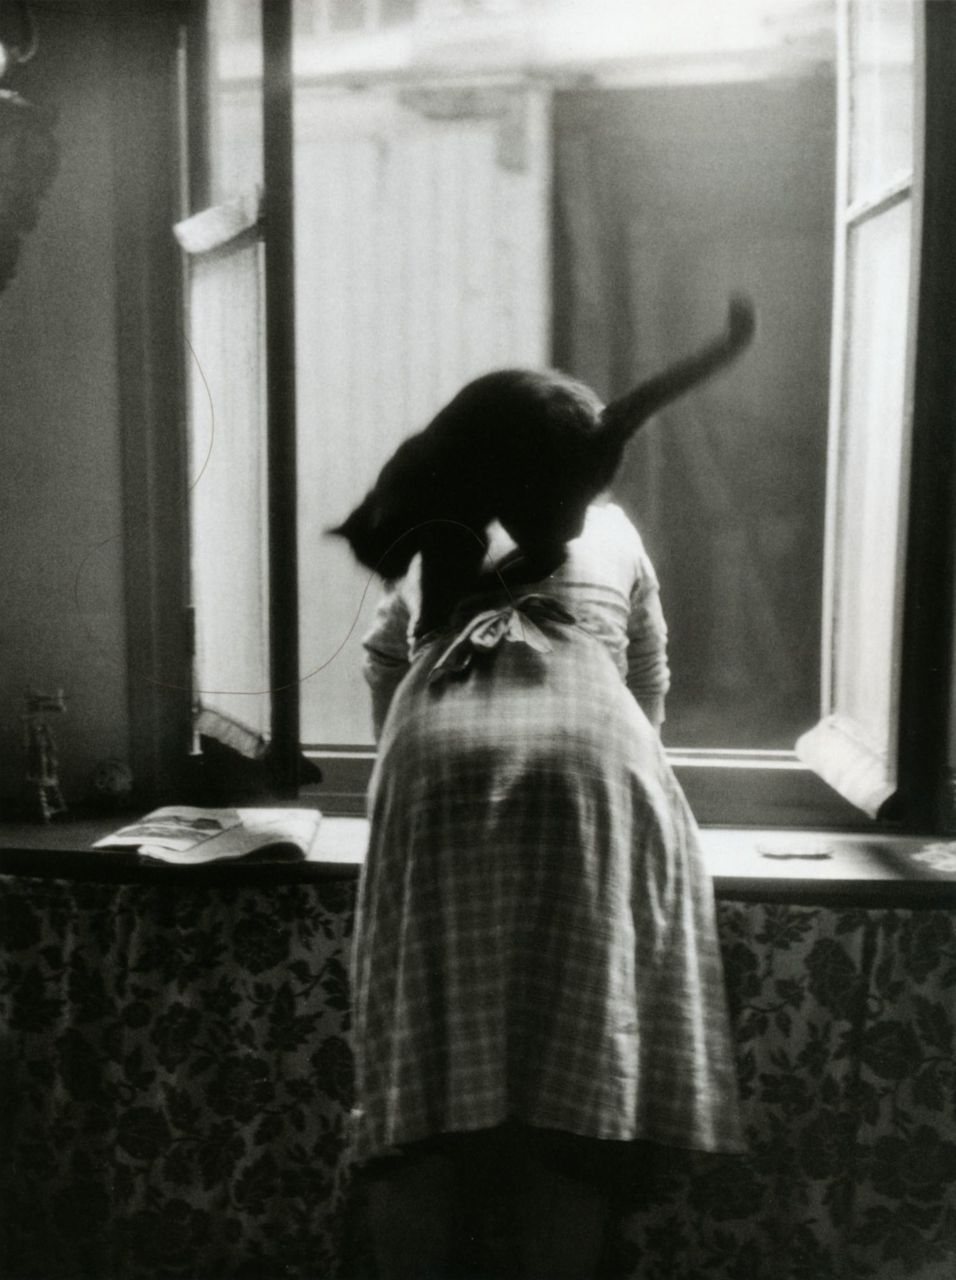 from-les-chats-de-willy-ronis-paris-1954-willy-ronis-1344798960_org